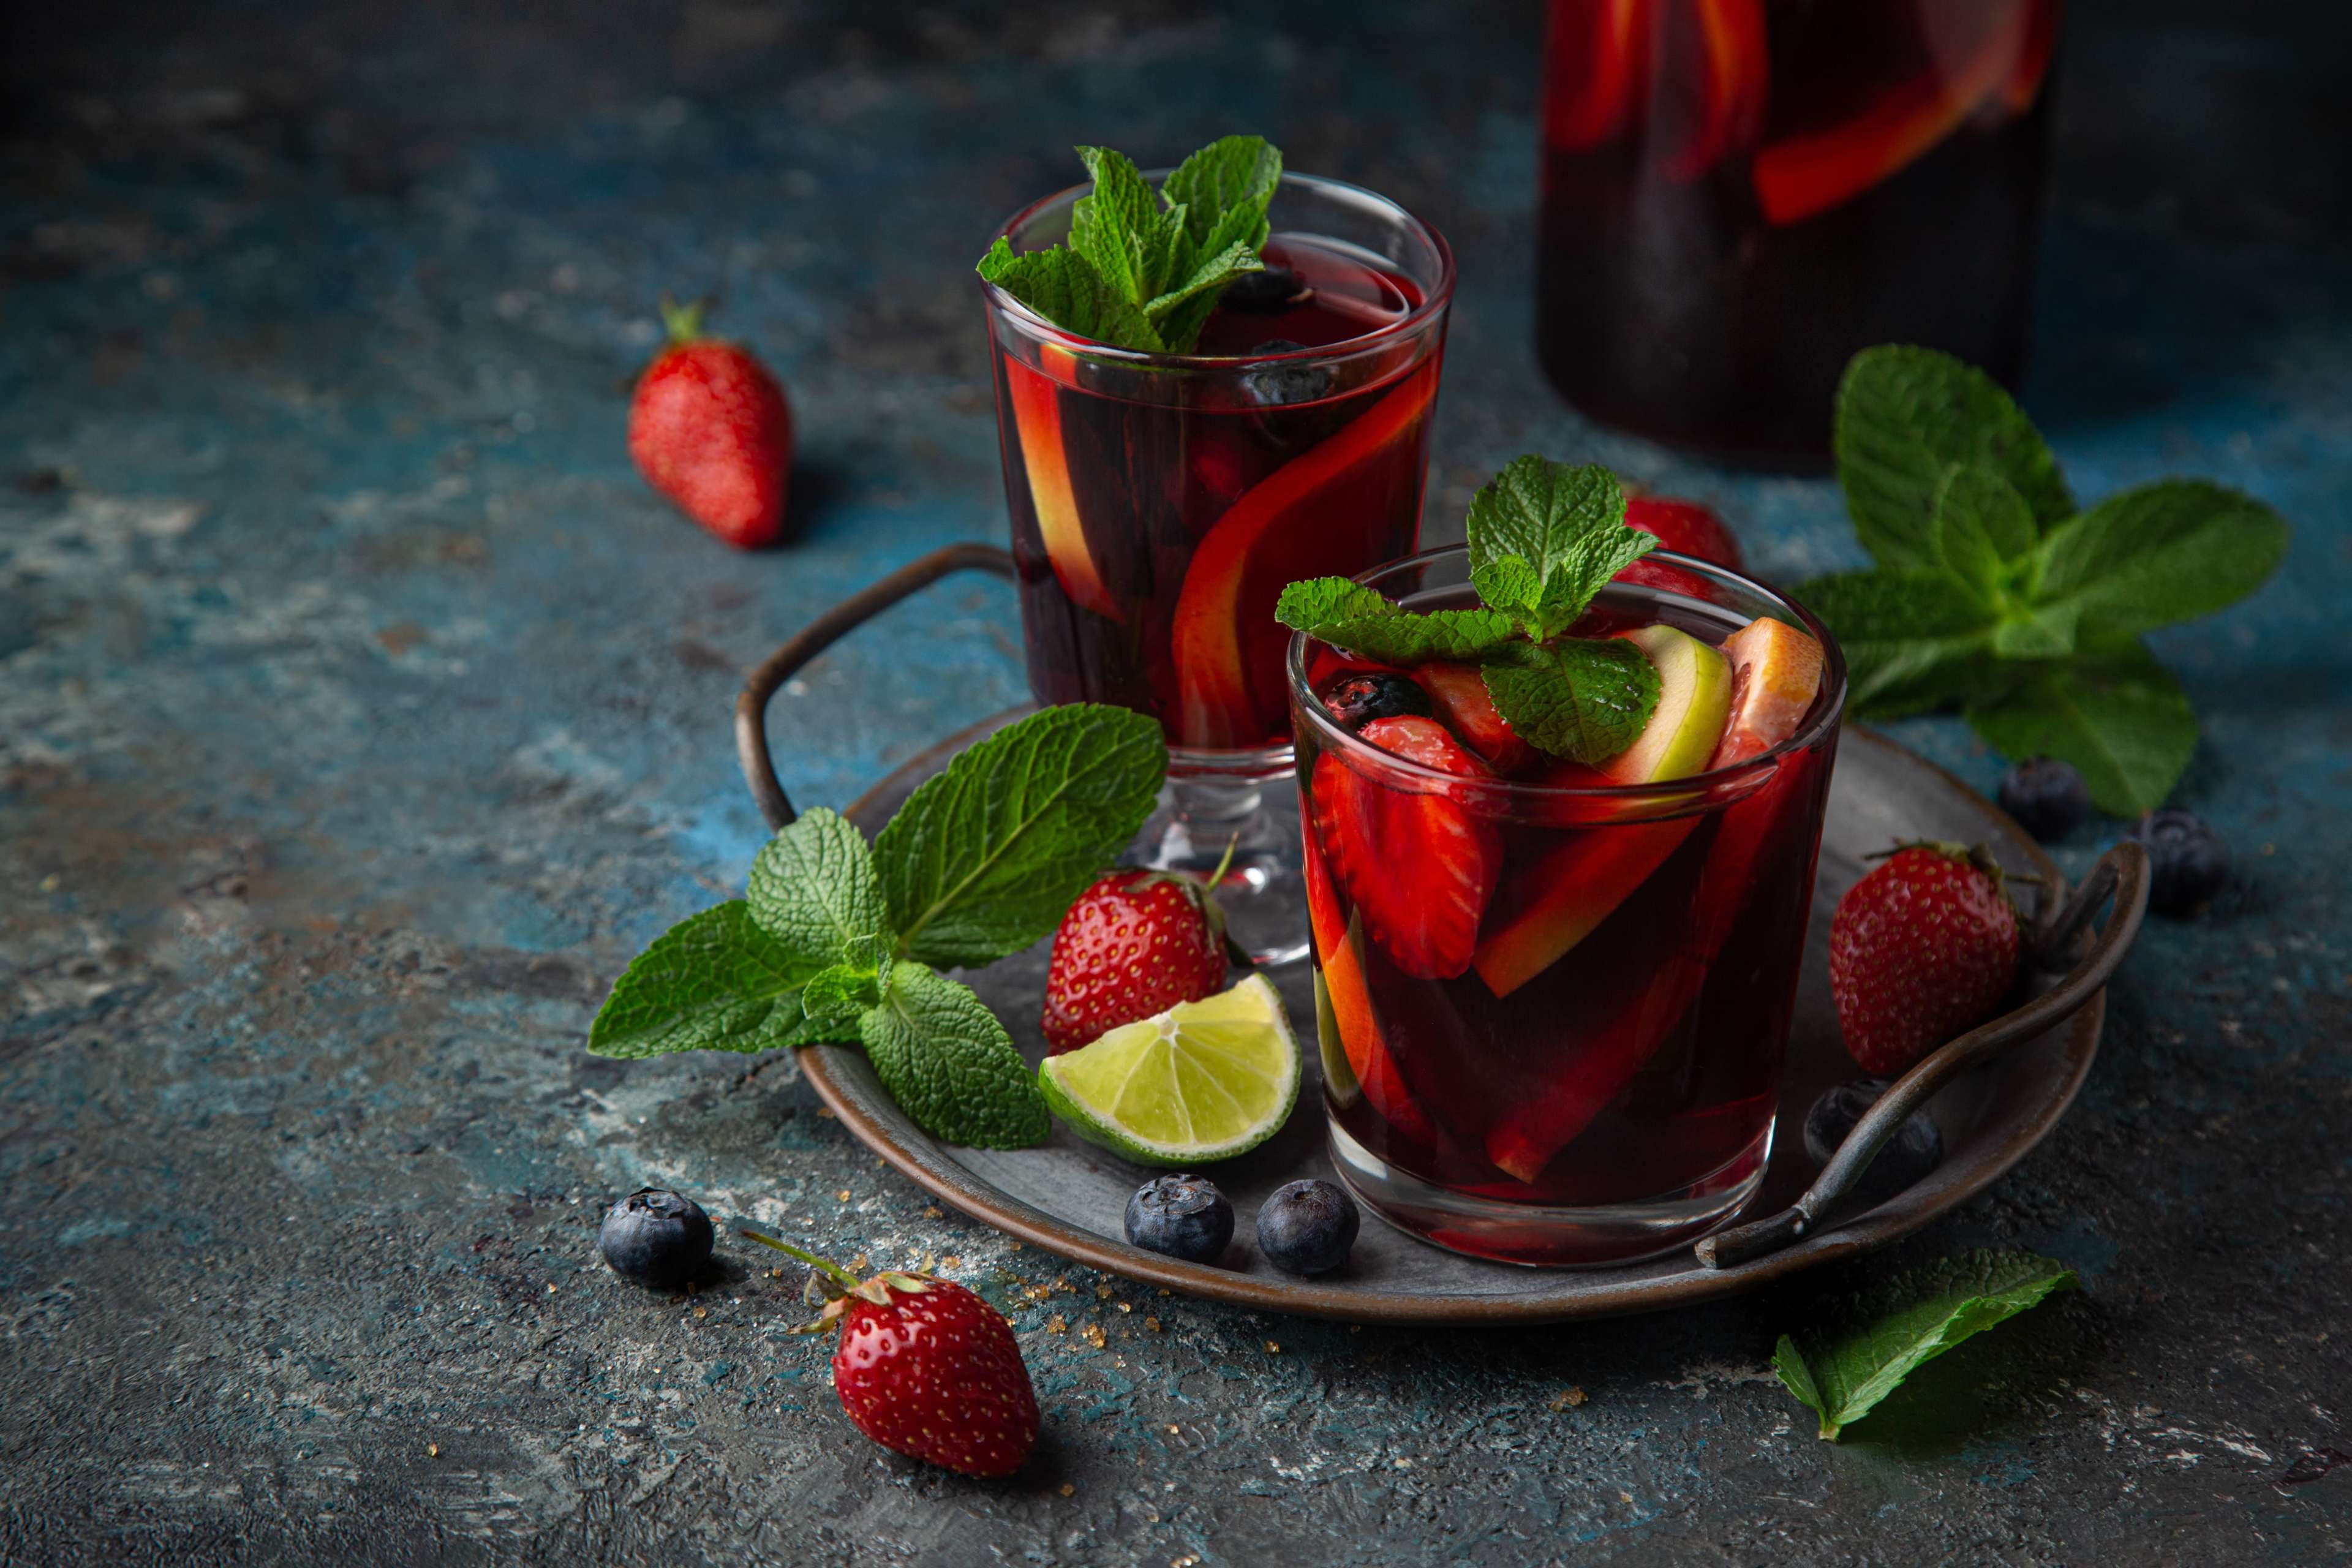 6192aa6354b6c6681f8f4d06_glass%20of%20homemade%20red%20wine%20sangria%20with%20fruits%20and%20berries.jpeg